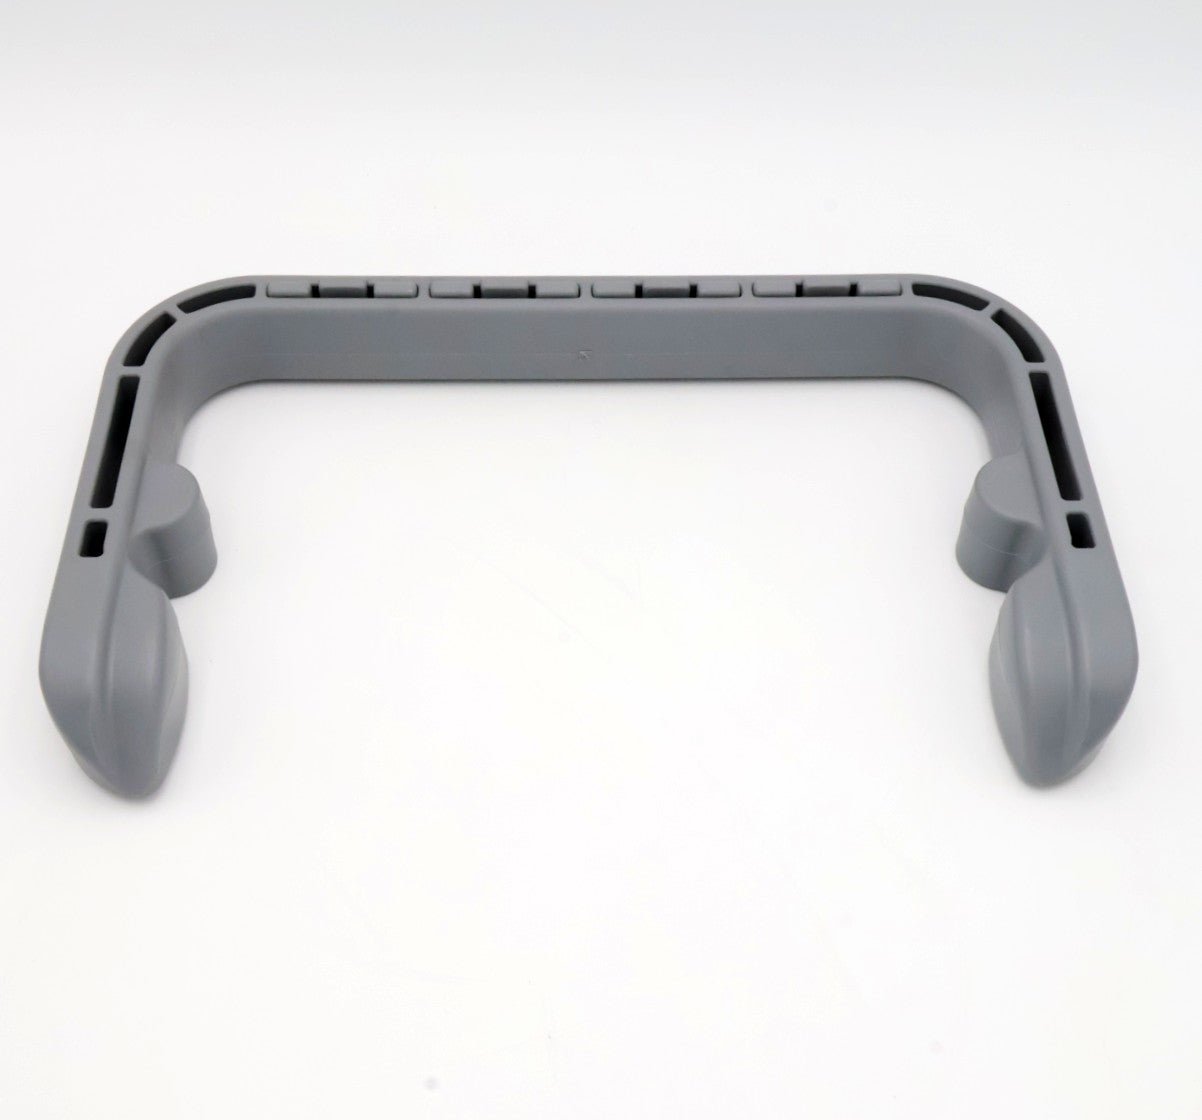 Pentair Bumper for Great White Cleaner GW9502 - Cleaner Parts - img-3